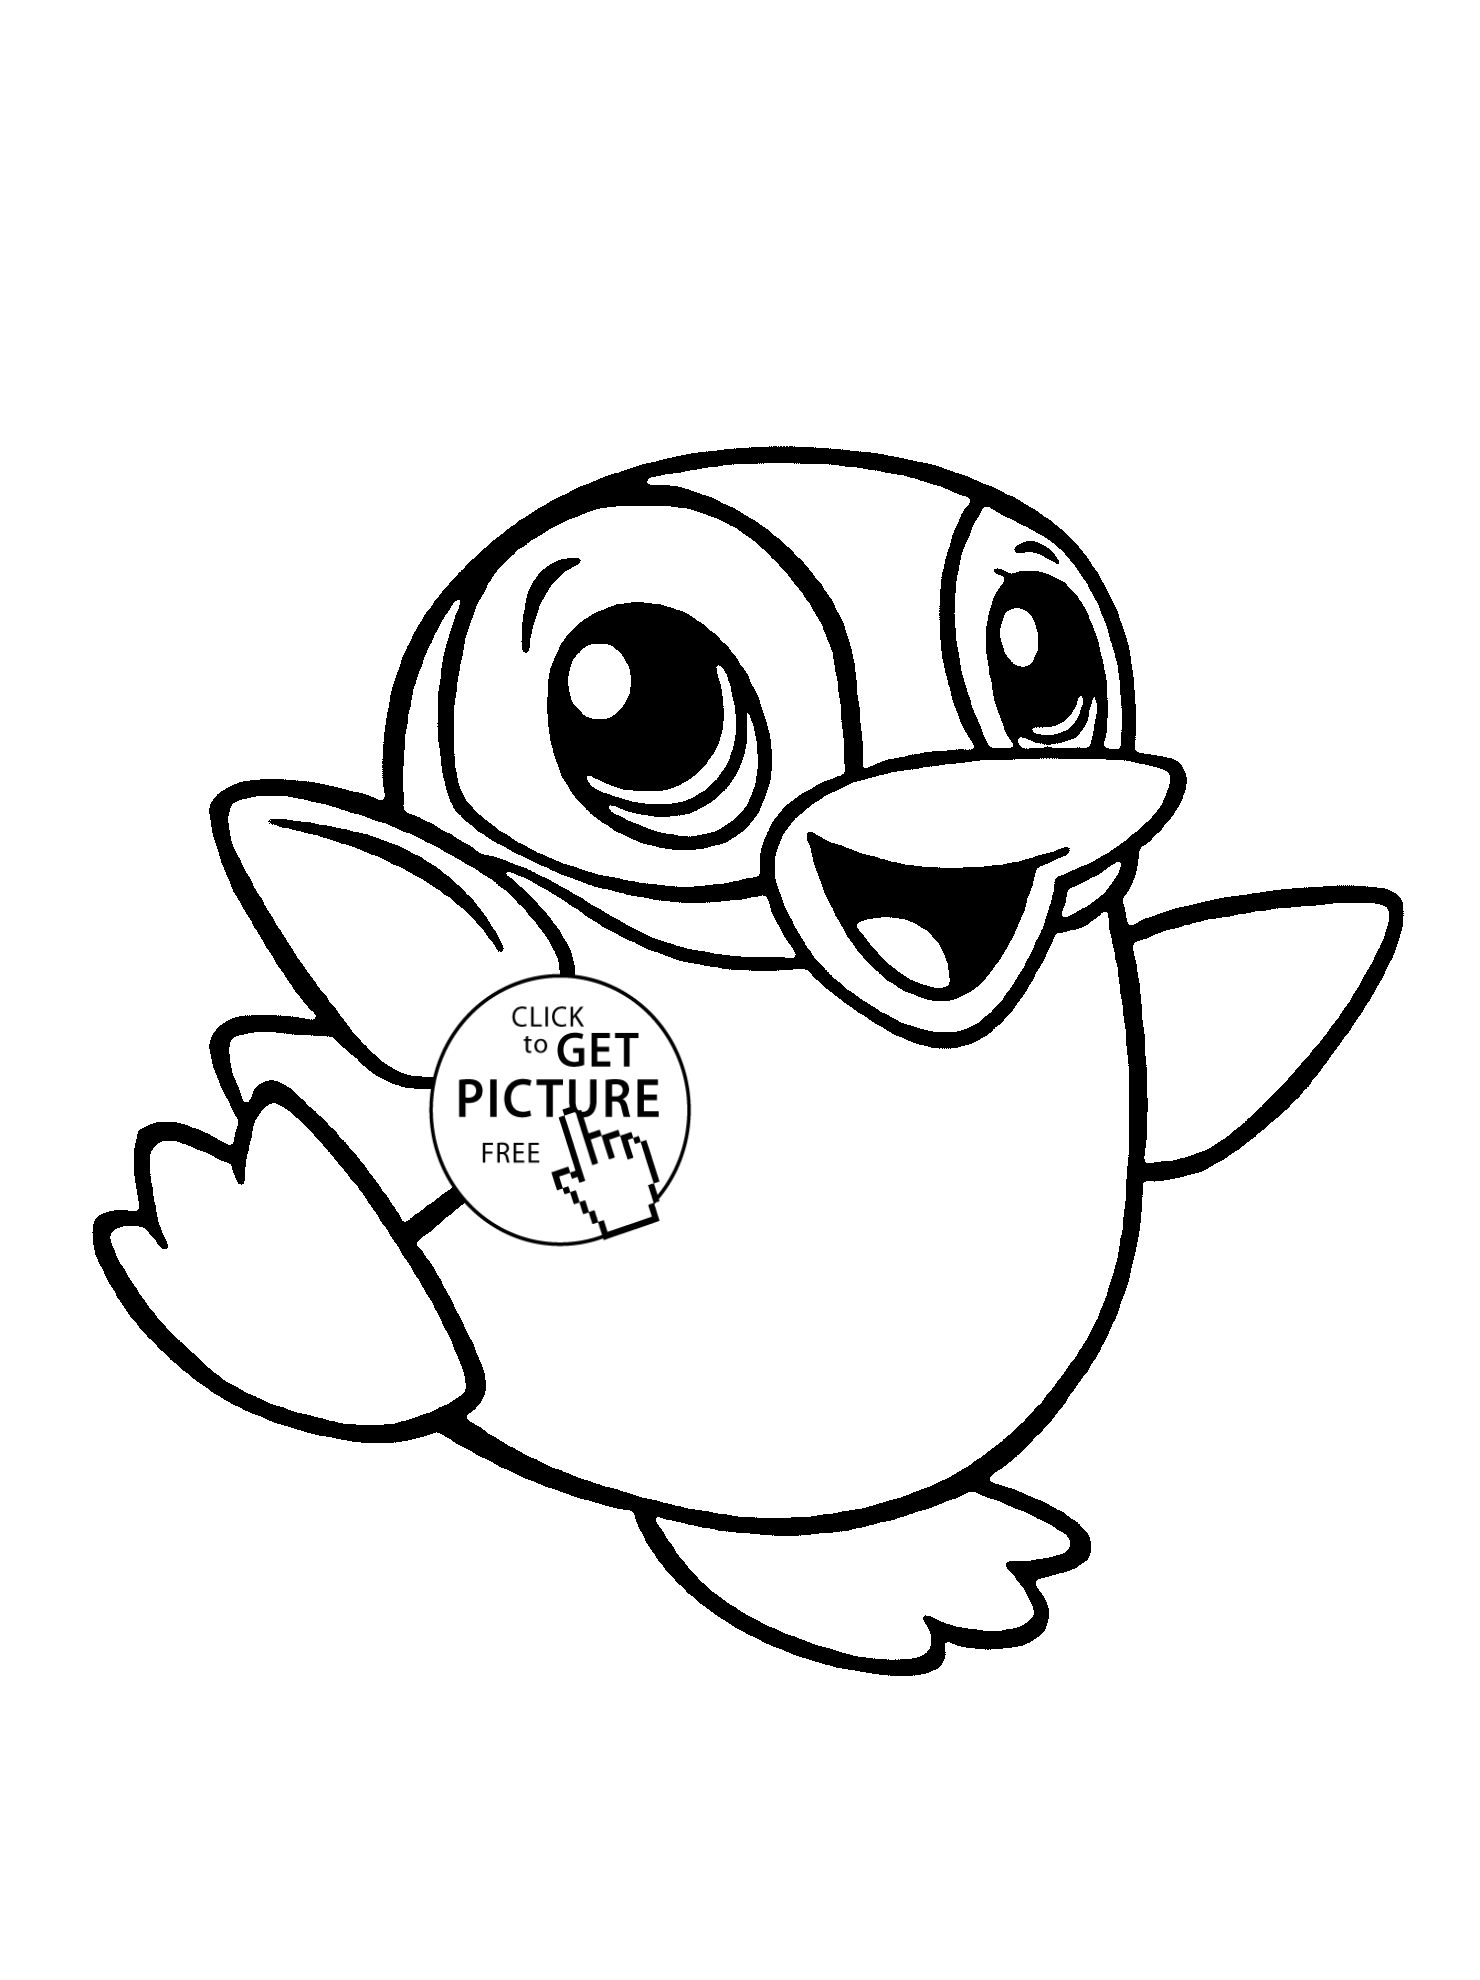 Coloring Pages For Elementary Students Penguin Coloring Pages For Elementary Kids With Printable Pictures